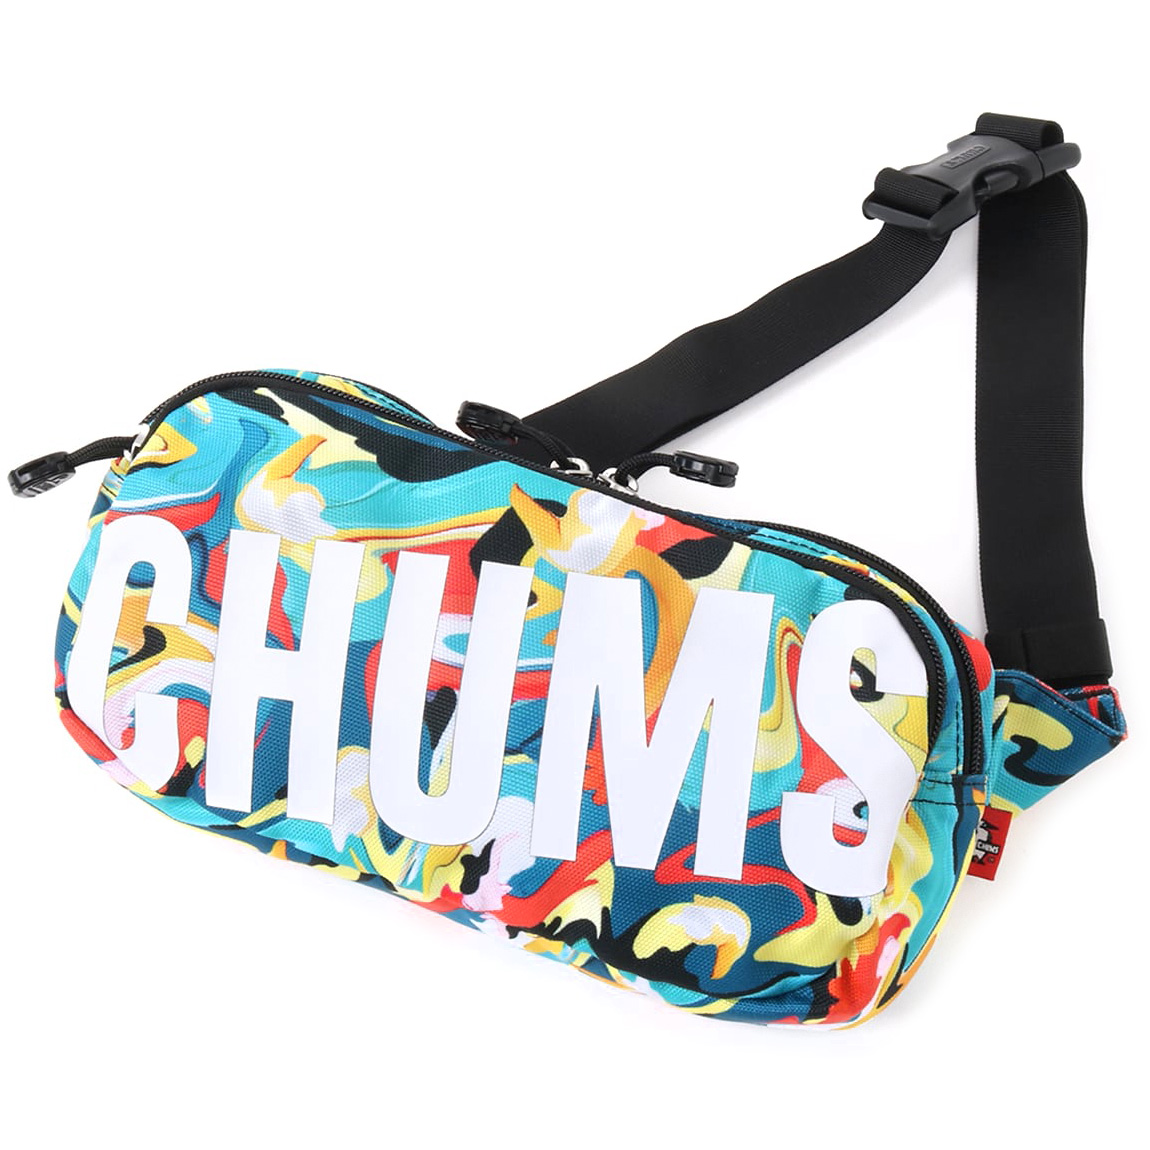 CHUMS ボディバッグ Recycle Waist Bag リサイクル ウエストバッグ チャムス